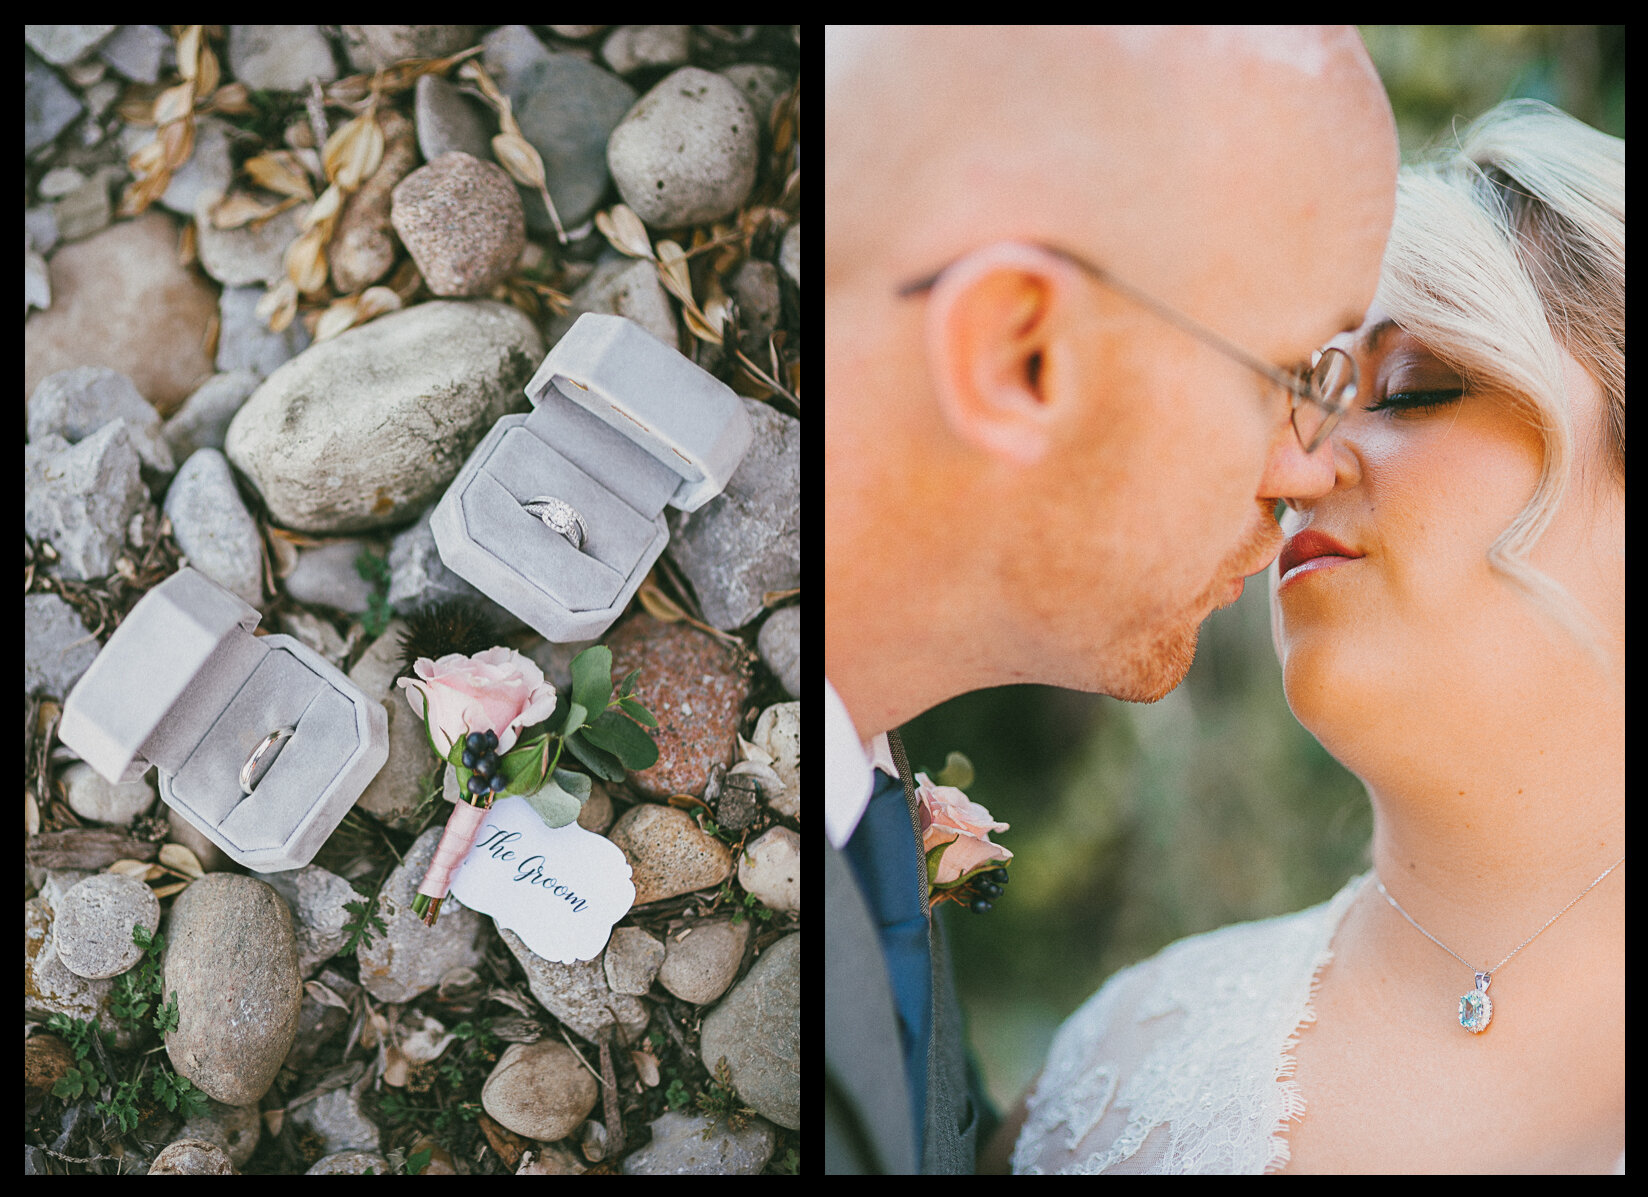 breighton-and-basette-photography-copyrighted-image-blog-jennifer-and-sean-wedding-collage-006.jpg